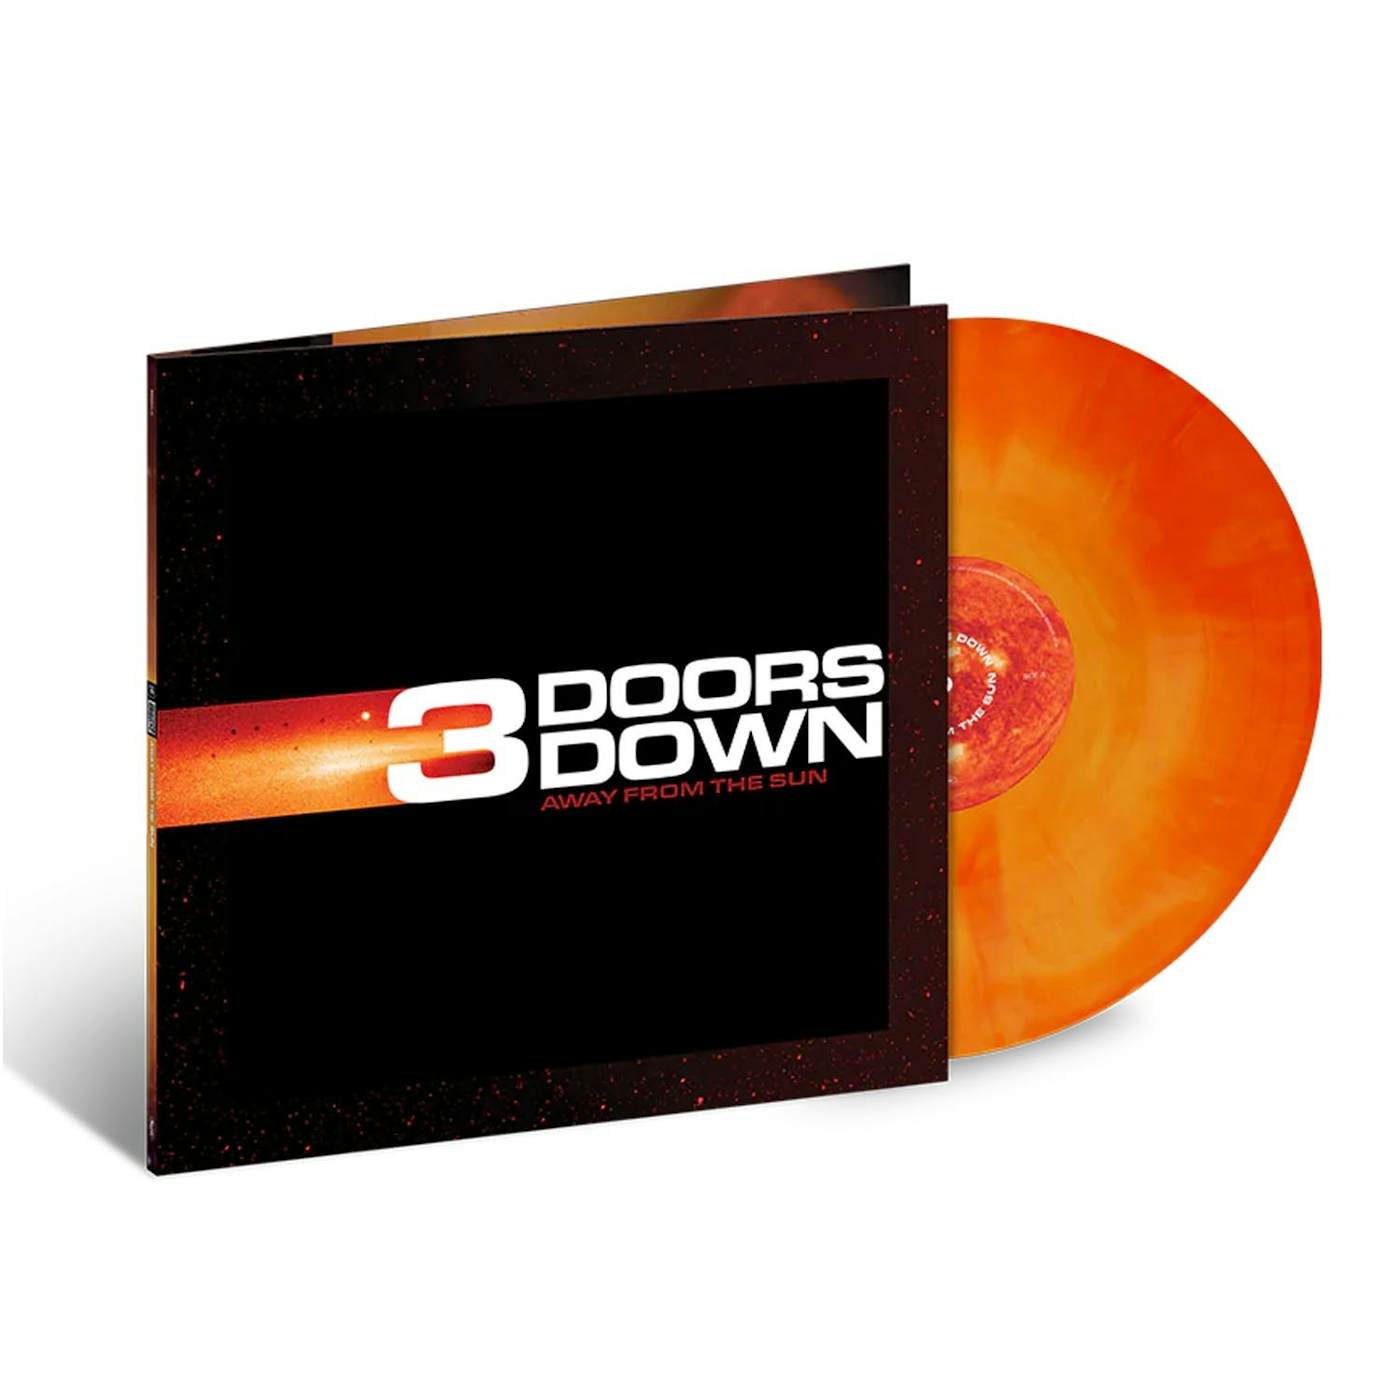 3 Doors Down Away From The Sun Limited Edition LP (Vinyl)